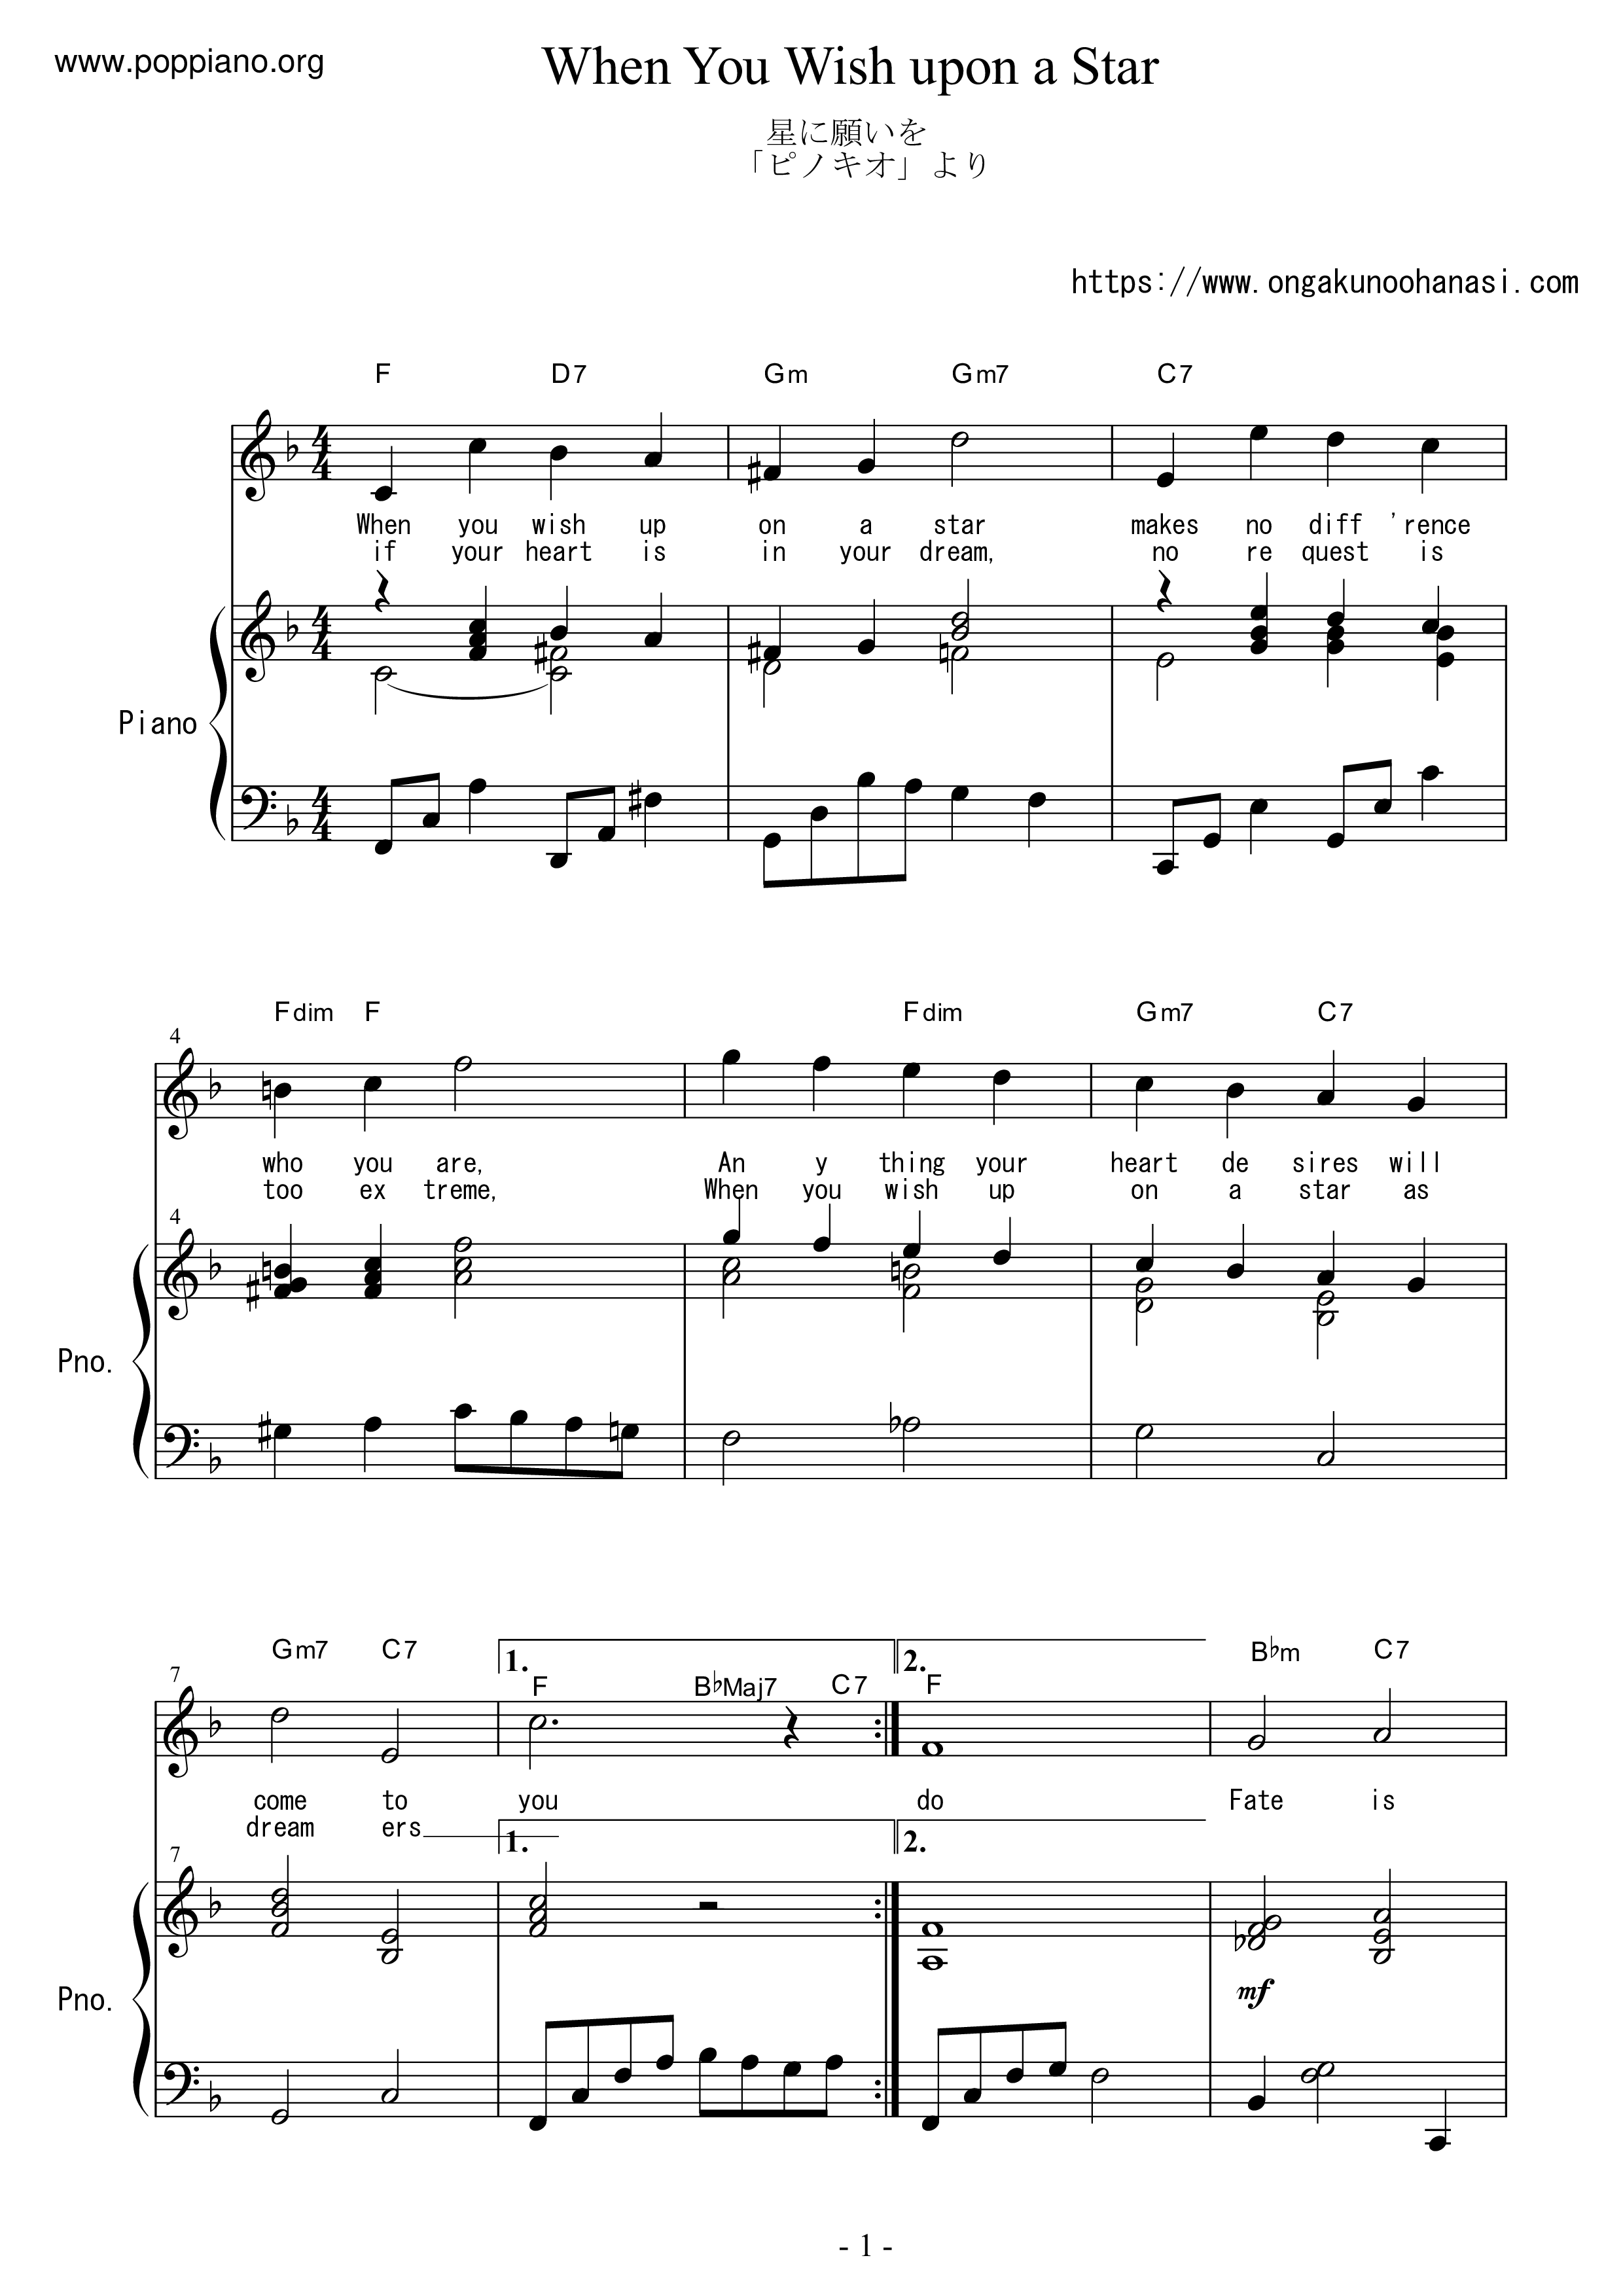 Movie Soundtrack Pinocchio When You Wish Upon A Star Sheet Music Pdf 星に願いを 楽譜 ディズニー Free Score Download